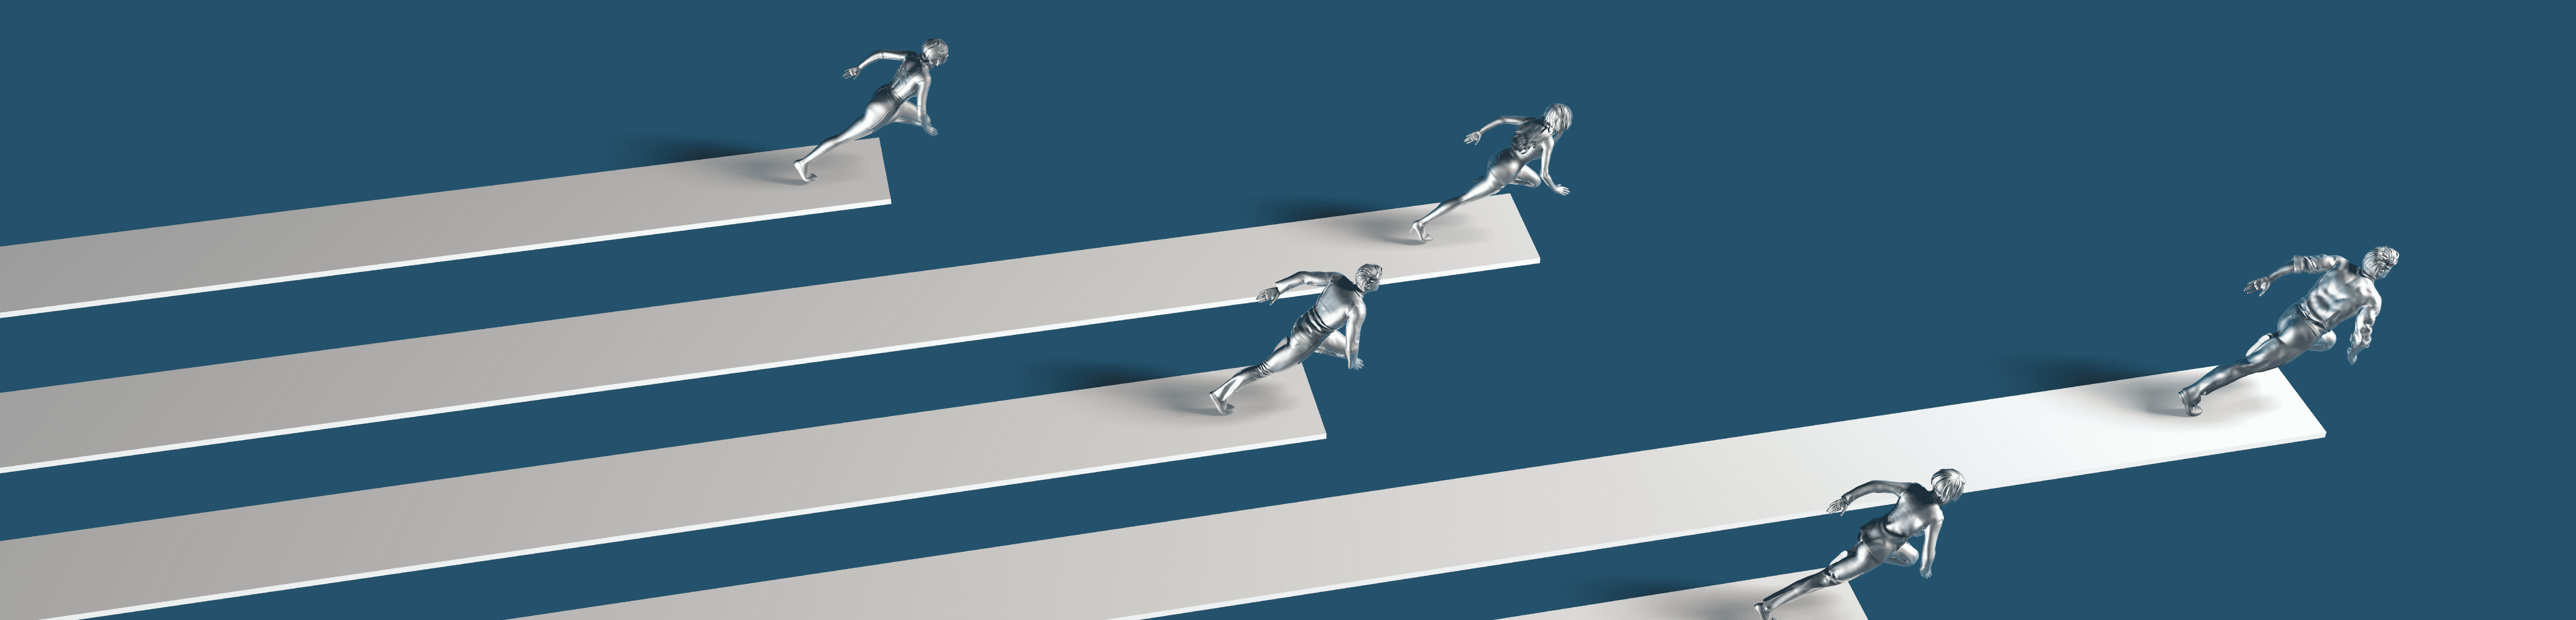 Blue background with models of sprinters running to the finish line